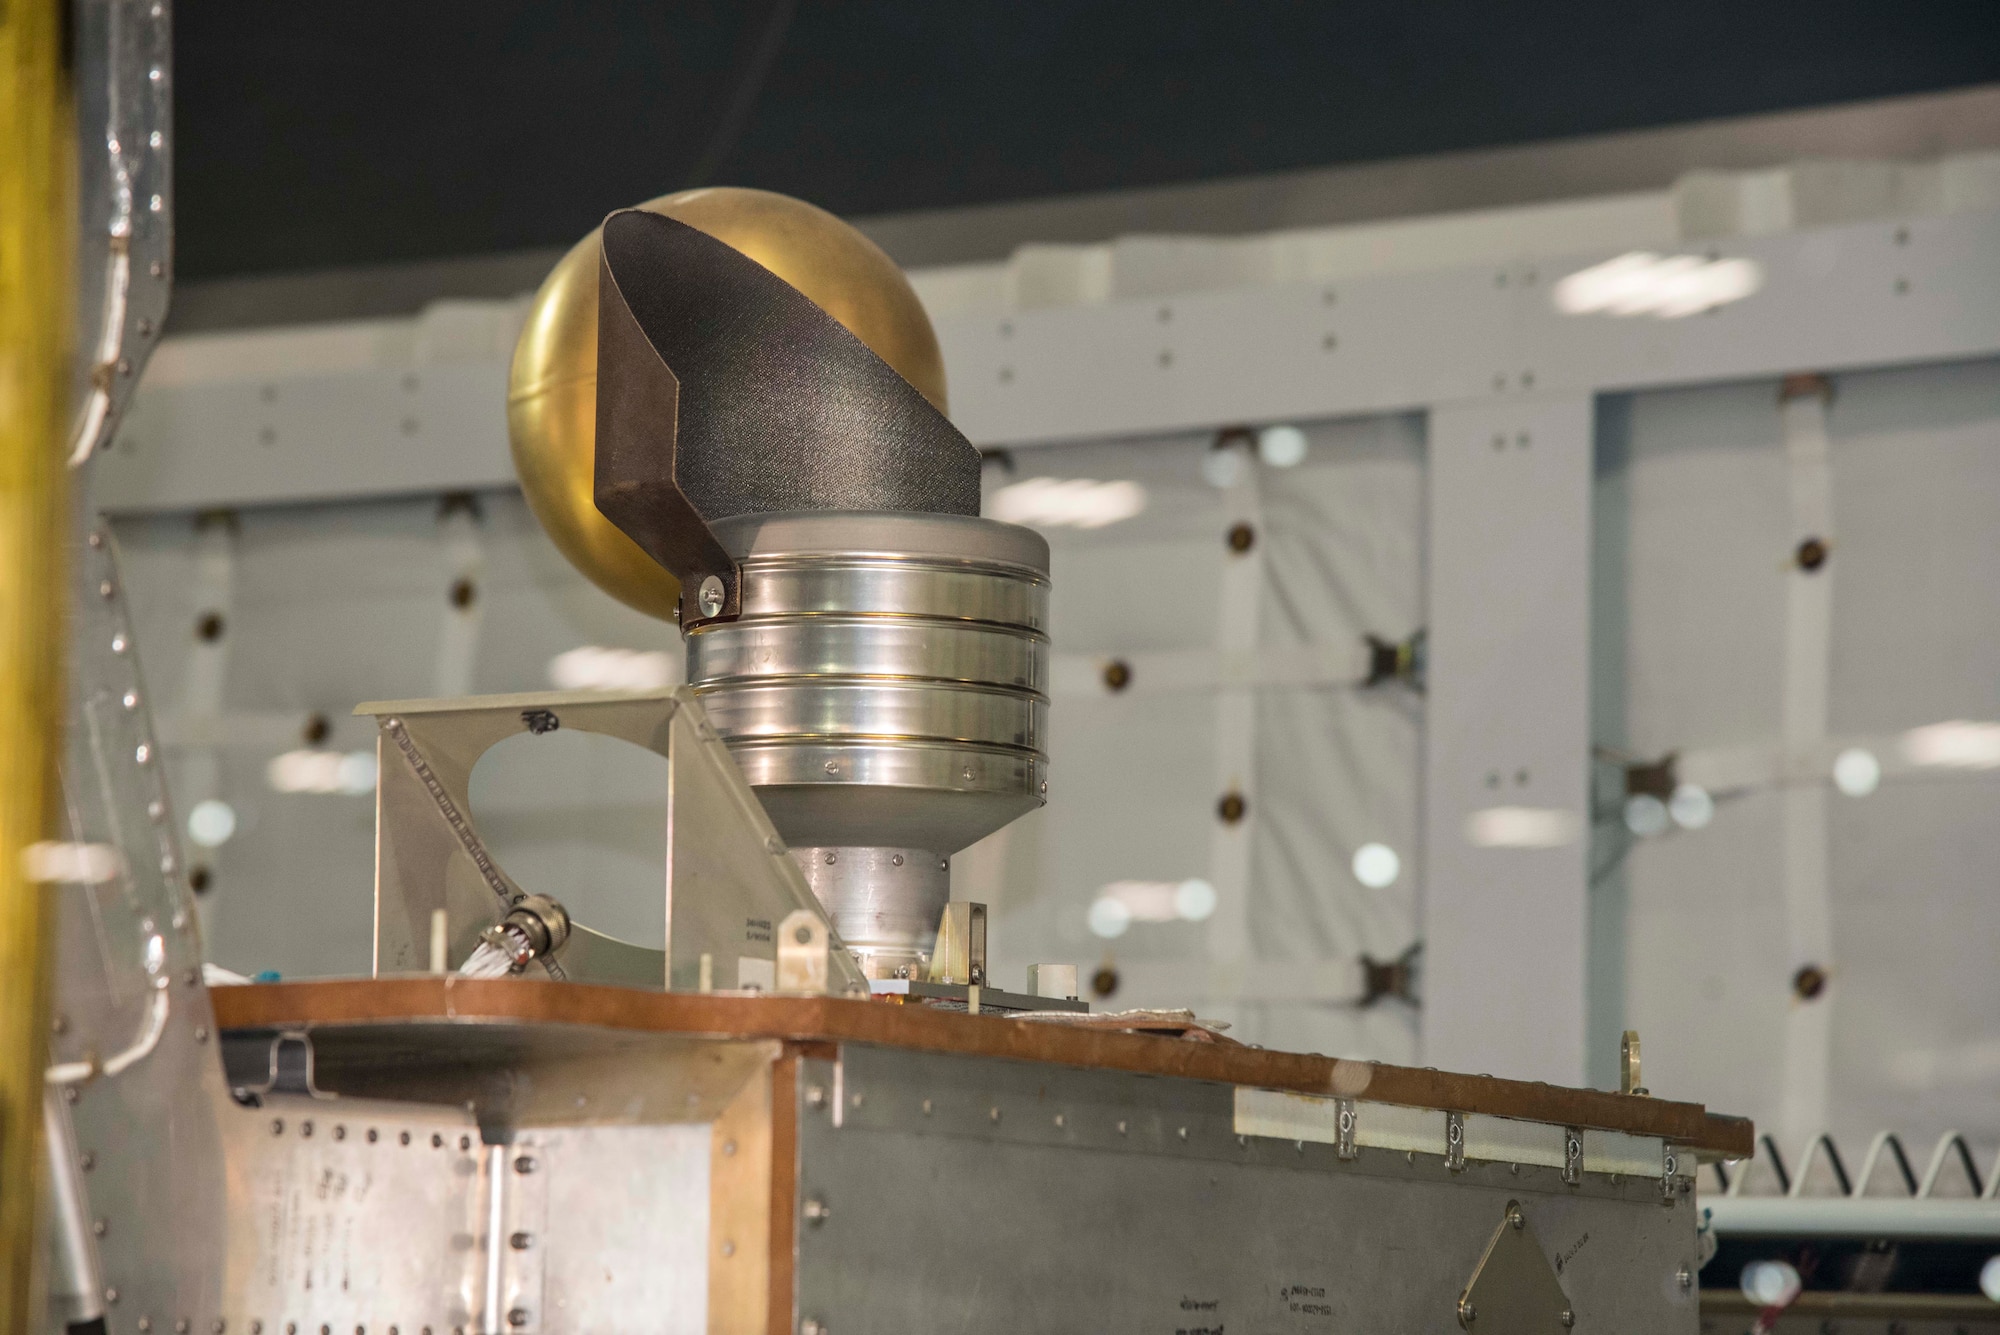 NASA Lewis (now Glenn) Researcher Center in Cleveland, OH, developed this ion thruster to help USAF spacecraft like P80-1 stay precisely positioned in space. The powerful lightweight thruster is electrical instead of a chemical rocket, and is powered by mercury. (U.S. Air Force photo by Ken LaRock)